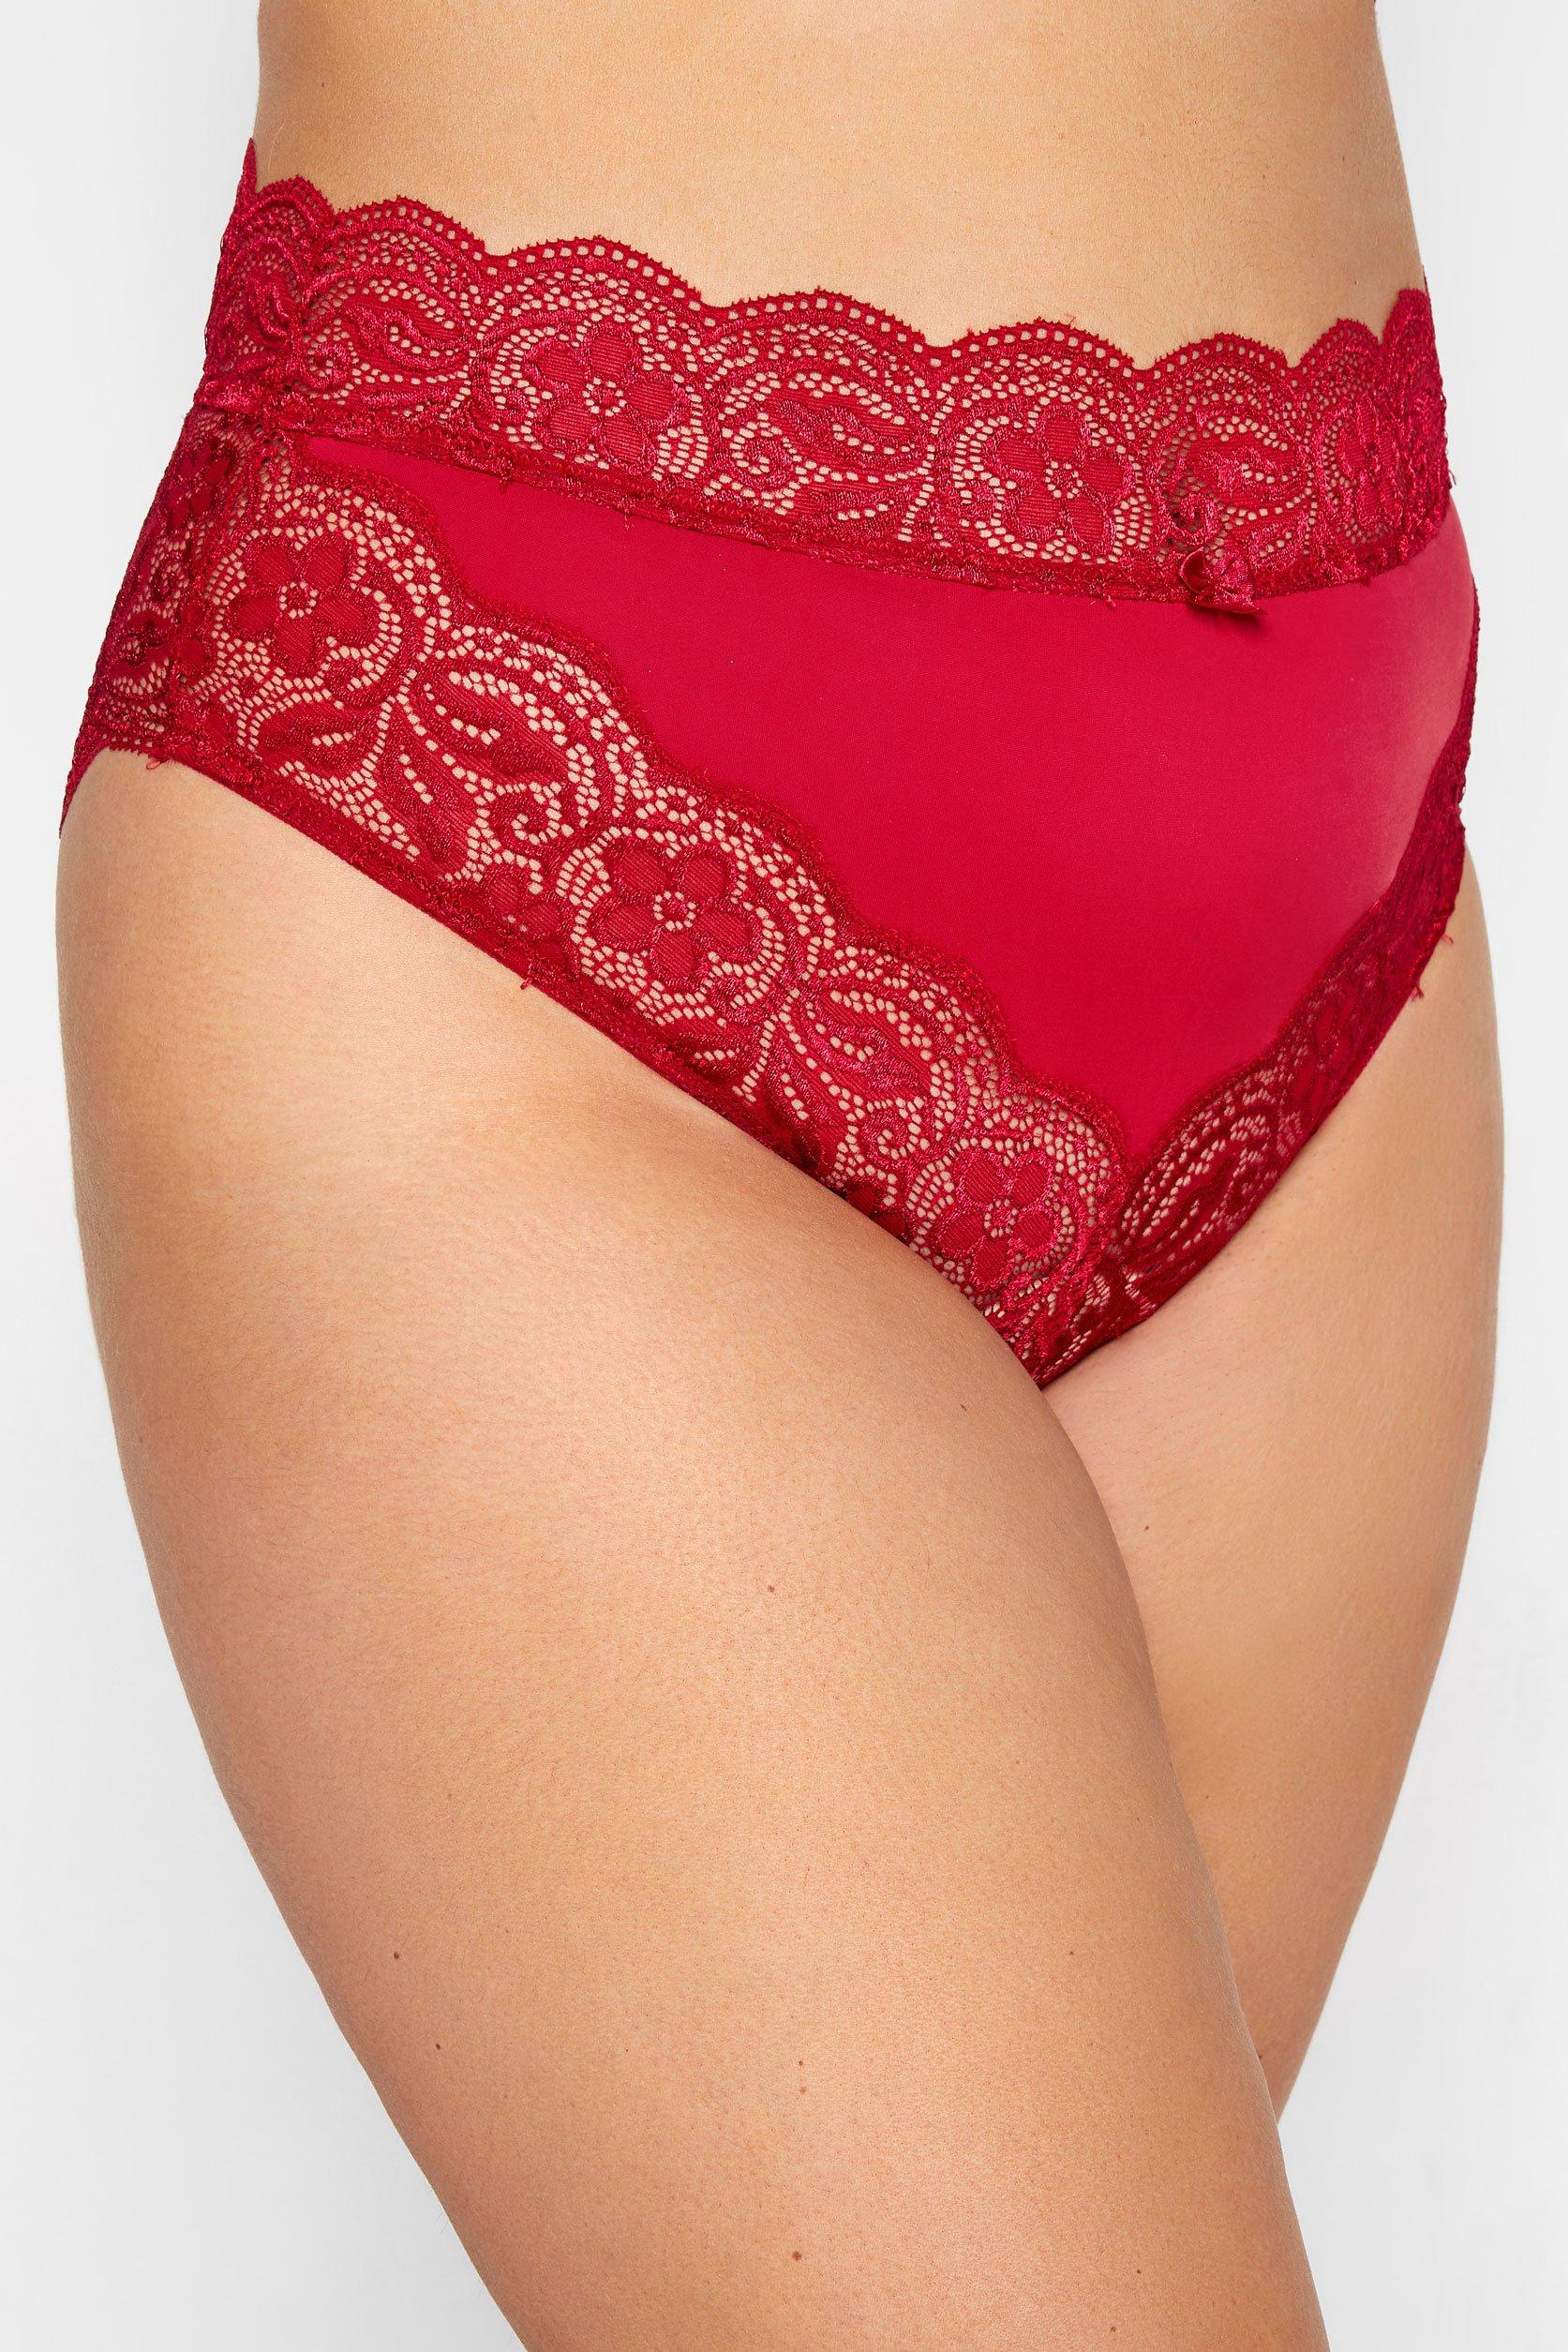 Yours Women's Lace Briefs|Size: 22-24|red